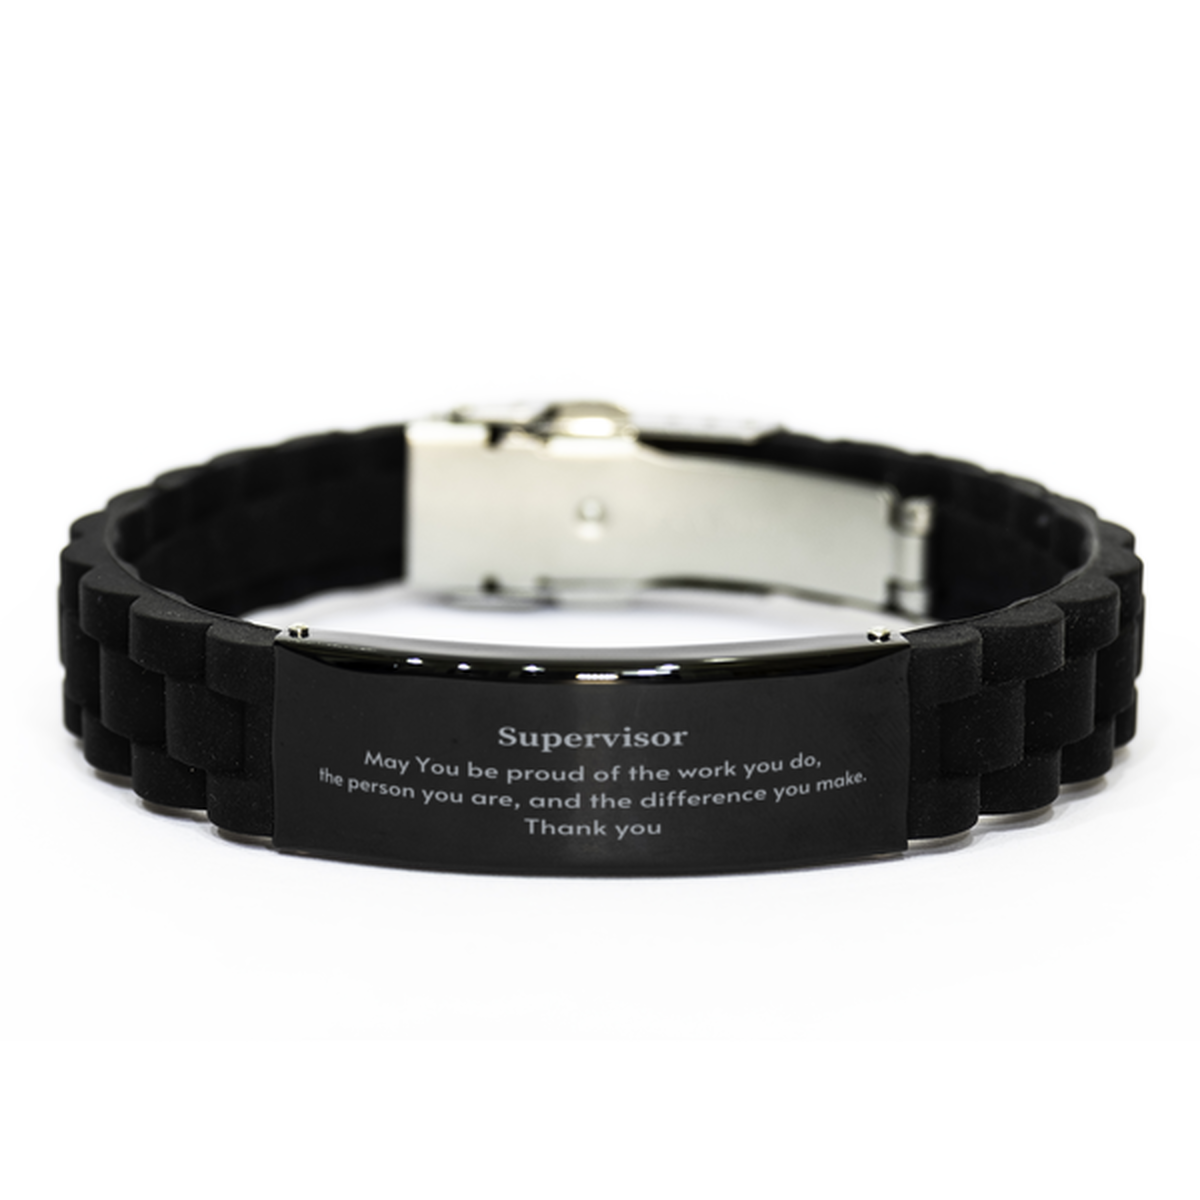 Heartwarming Black Glidelock Clasp Bracelet Retirement Coworkers Gifts for Supervisor, Supervisor May You be proud of the work you do, the person you are Gifts for Boss Men Women Friends